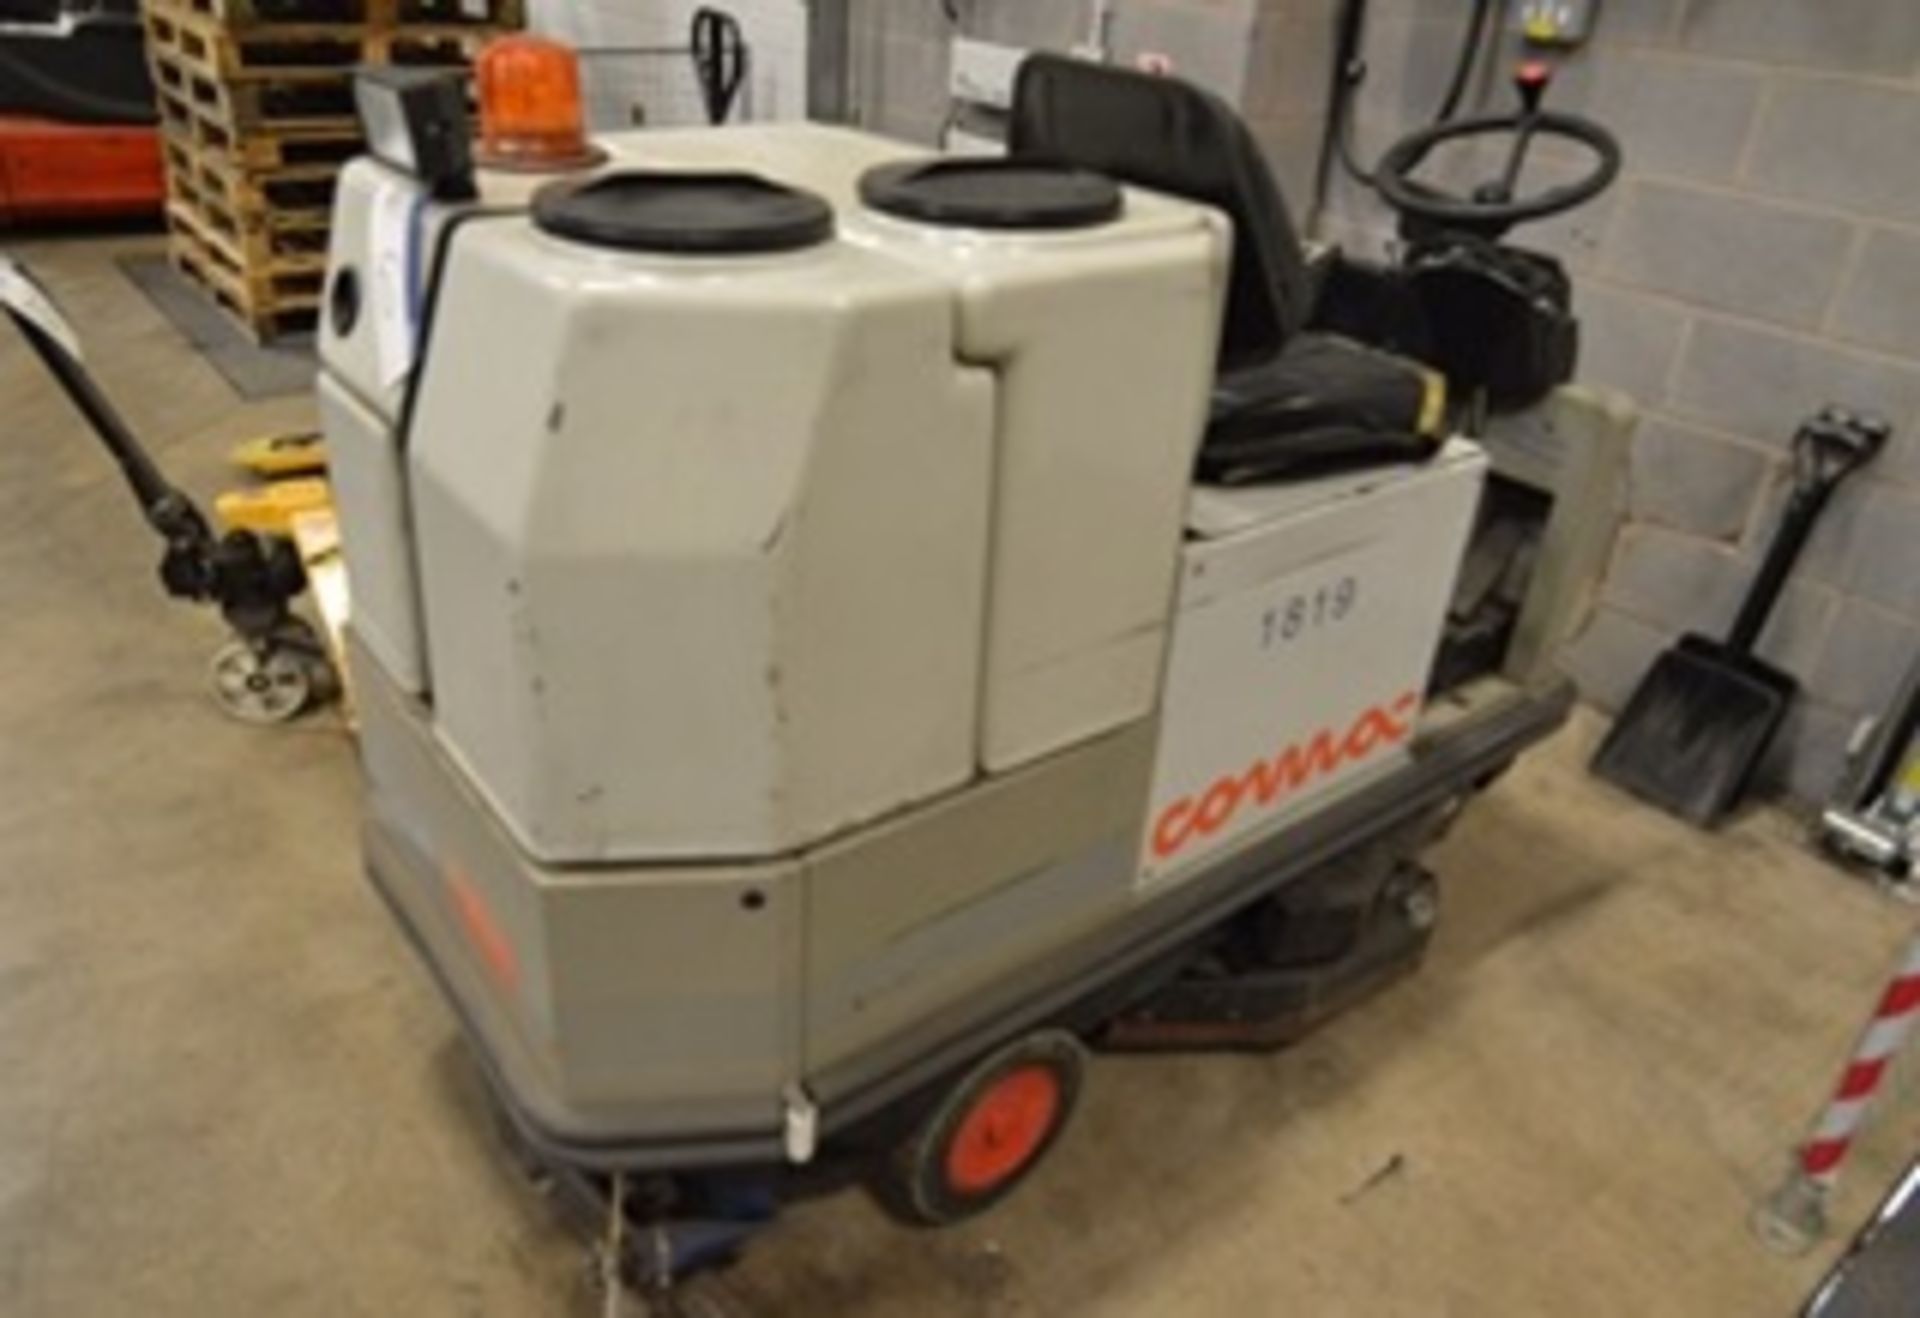 Comac C85B Ride-On-Floor Cleaning Machine - Image 2 of 5